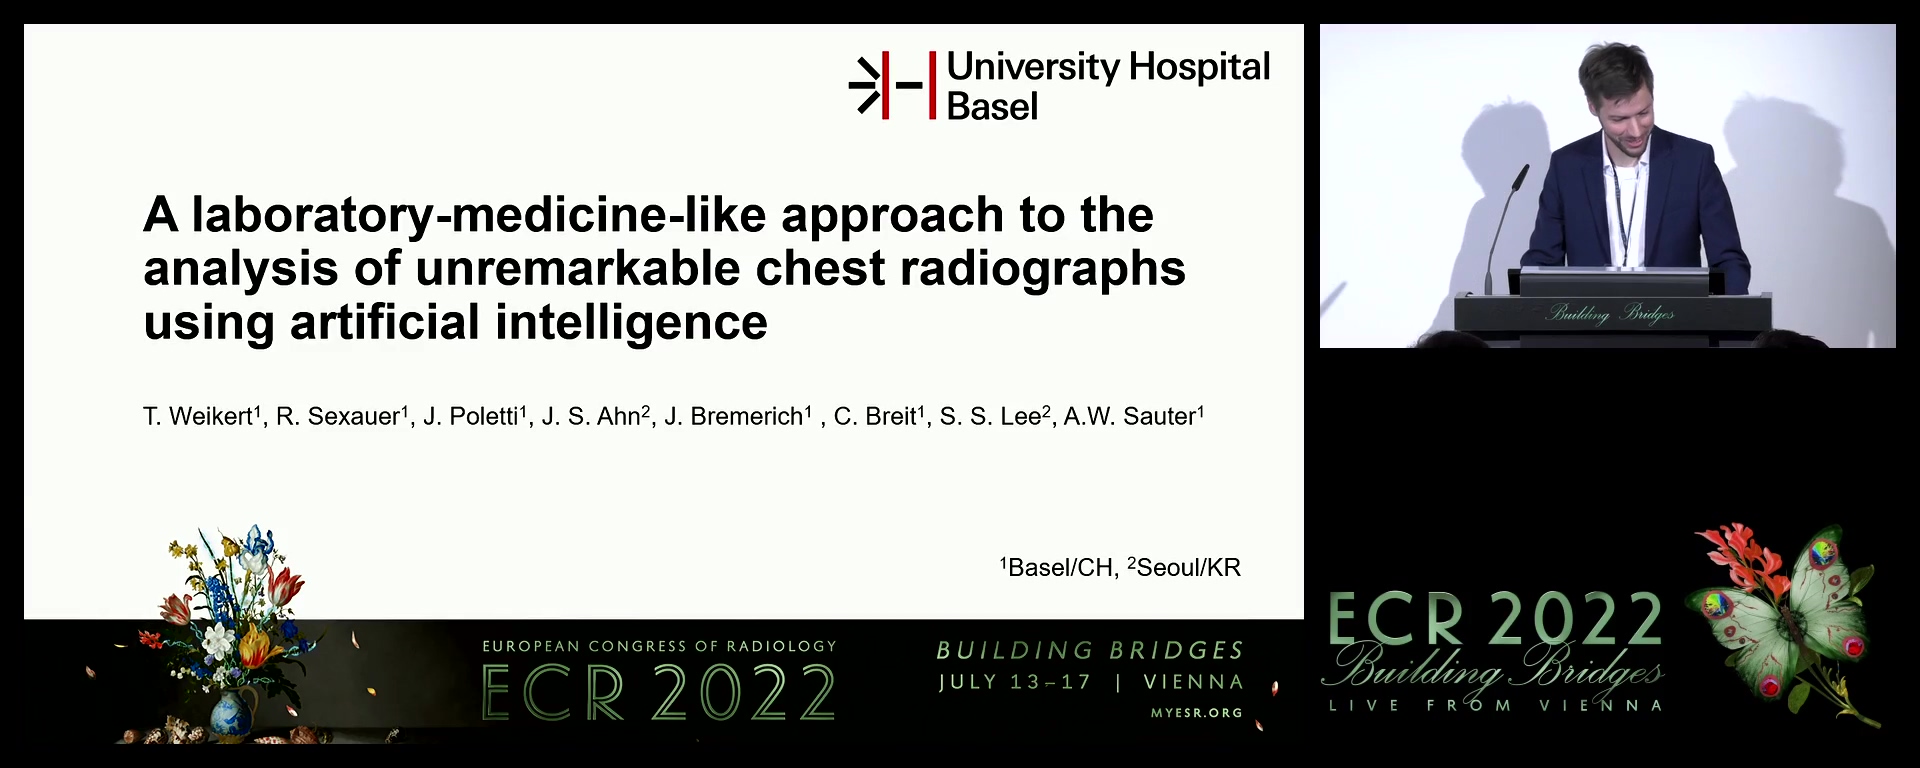 A laboratory-medicine-like approach to the analysis of unremarkable chest radiographs using artificial intelligence